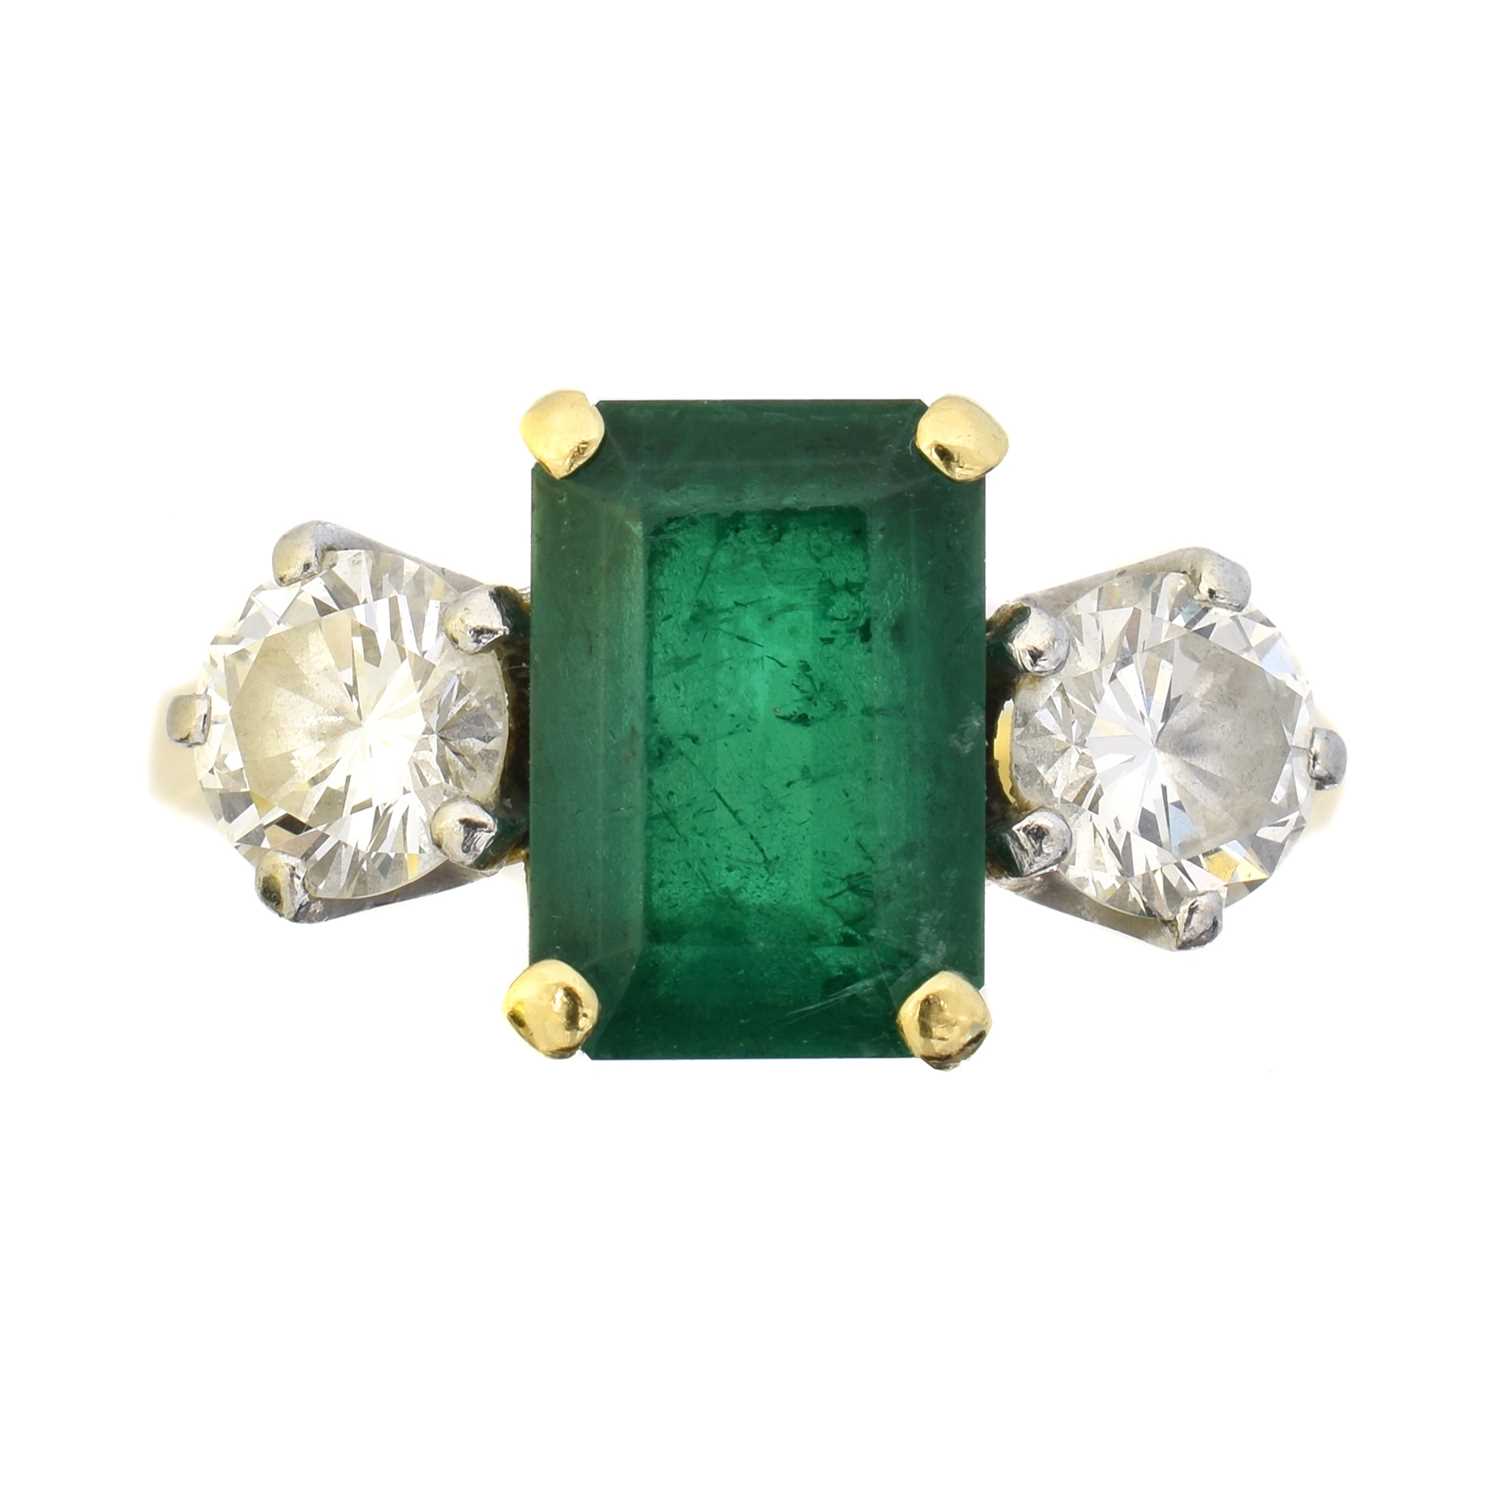 Lot 111 - An 18ct gold emerald and diamond ring by Garrard